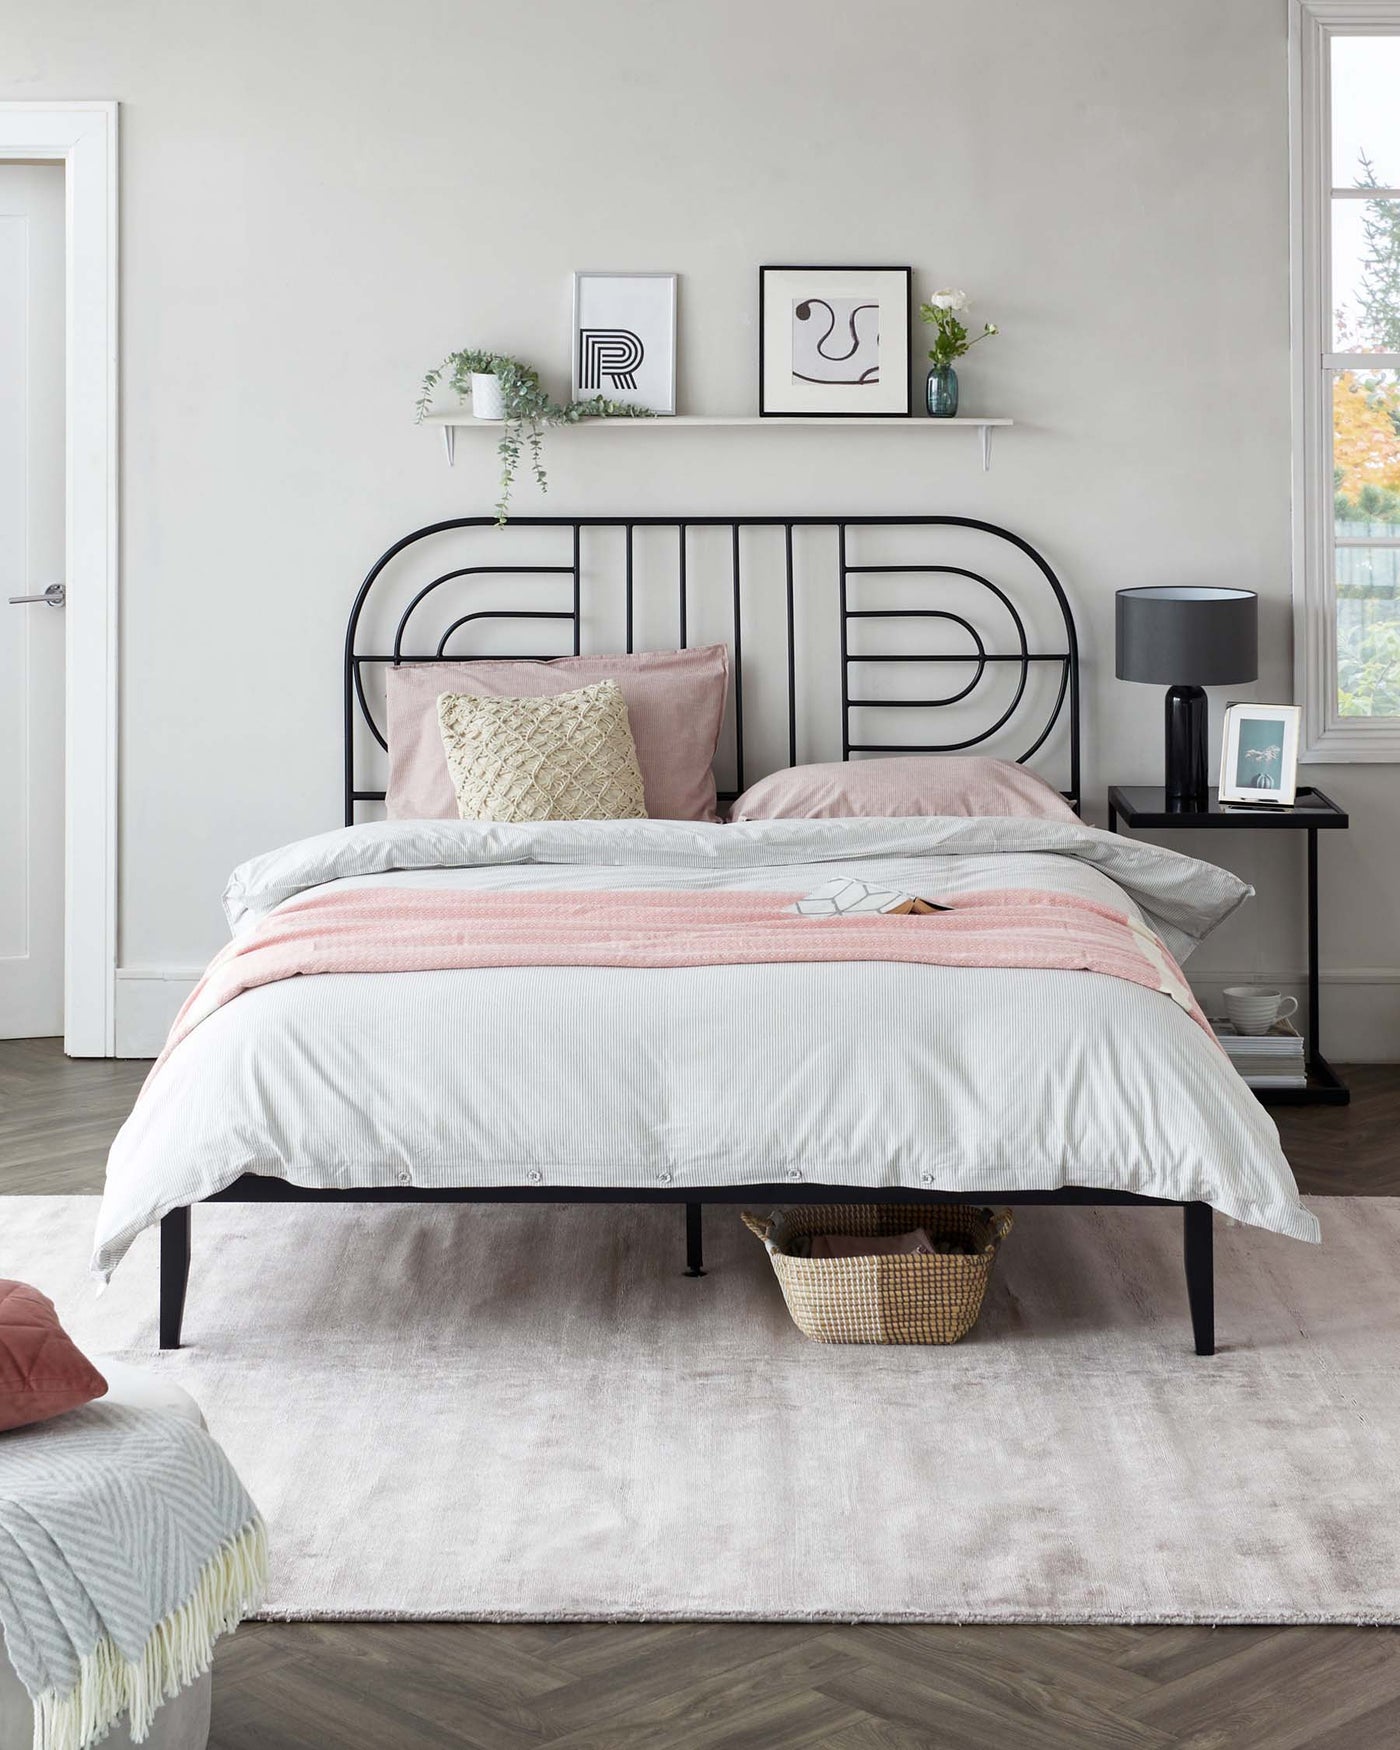 A contemporary-style bedroom featuring a metal frame bed with a minimalist headboard design, complemented by soft pink and grey bedding. Next to the bed stands a sleek black bedside table with a modern lamp, all anchored upon a plush, light grey area rug. A small wicker basket can be observed under the bed.